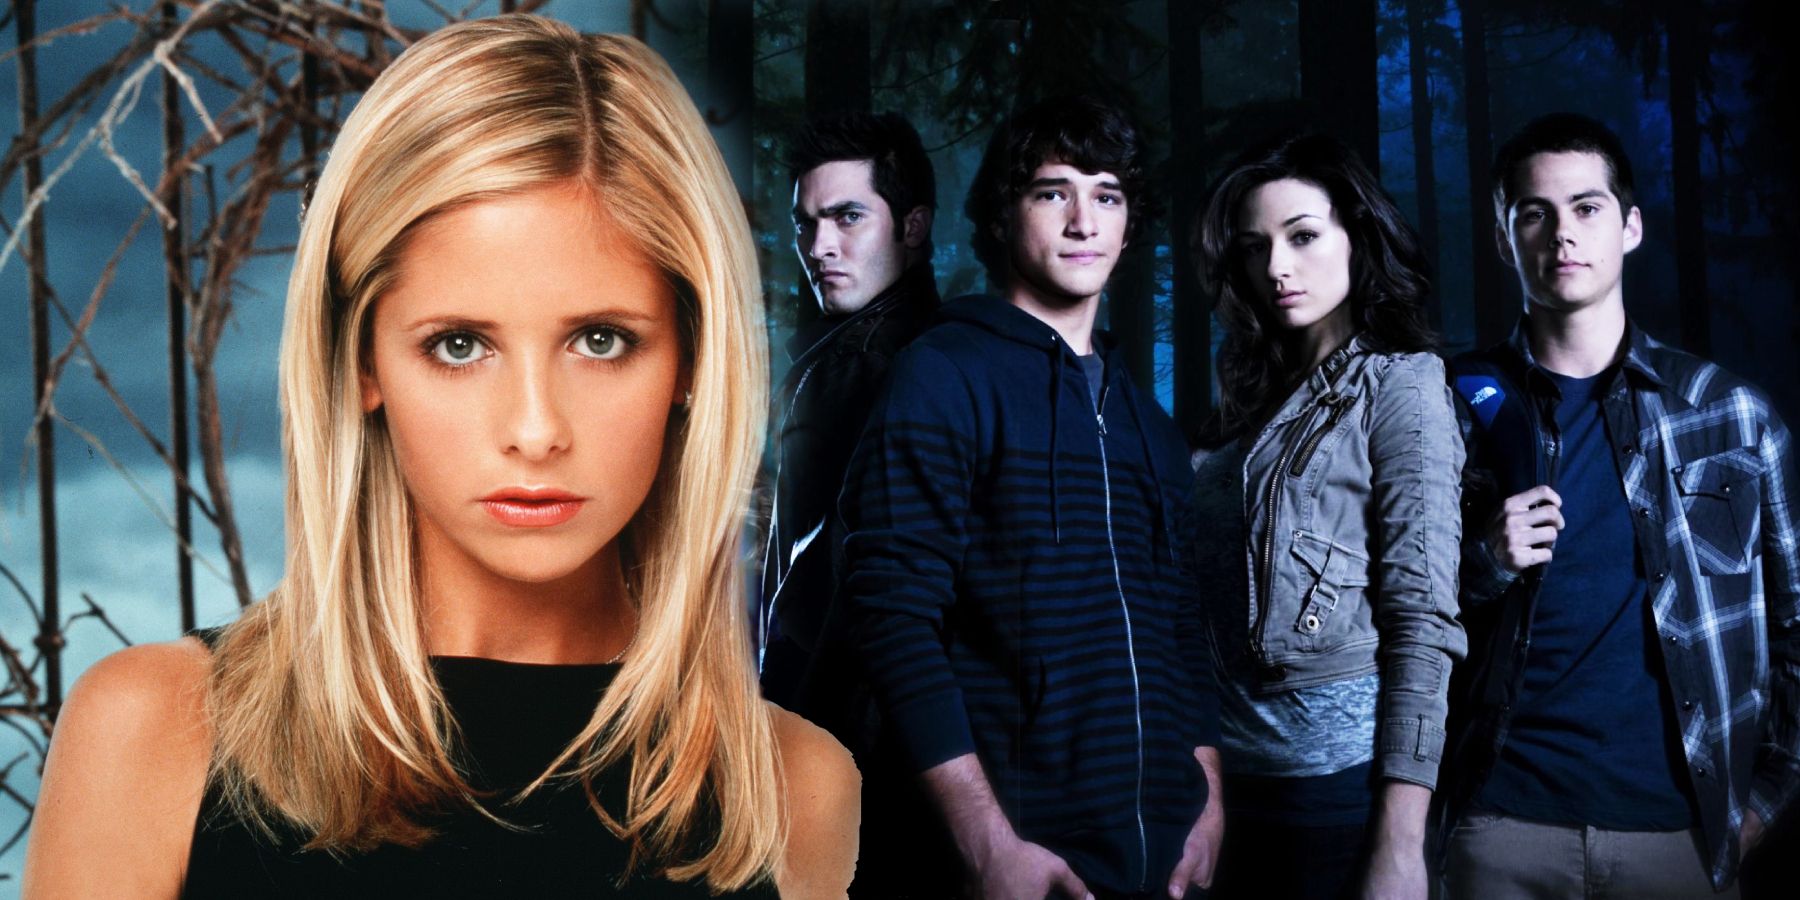 Sarah Michelle Gellar Hasn’t Been In A Movie Since 2009 – Now She’s Been In 2 This Week